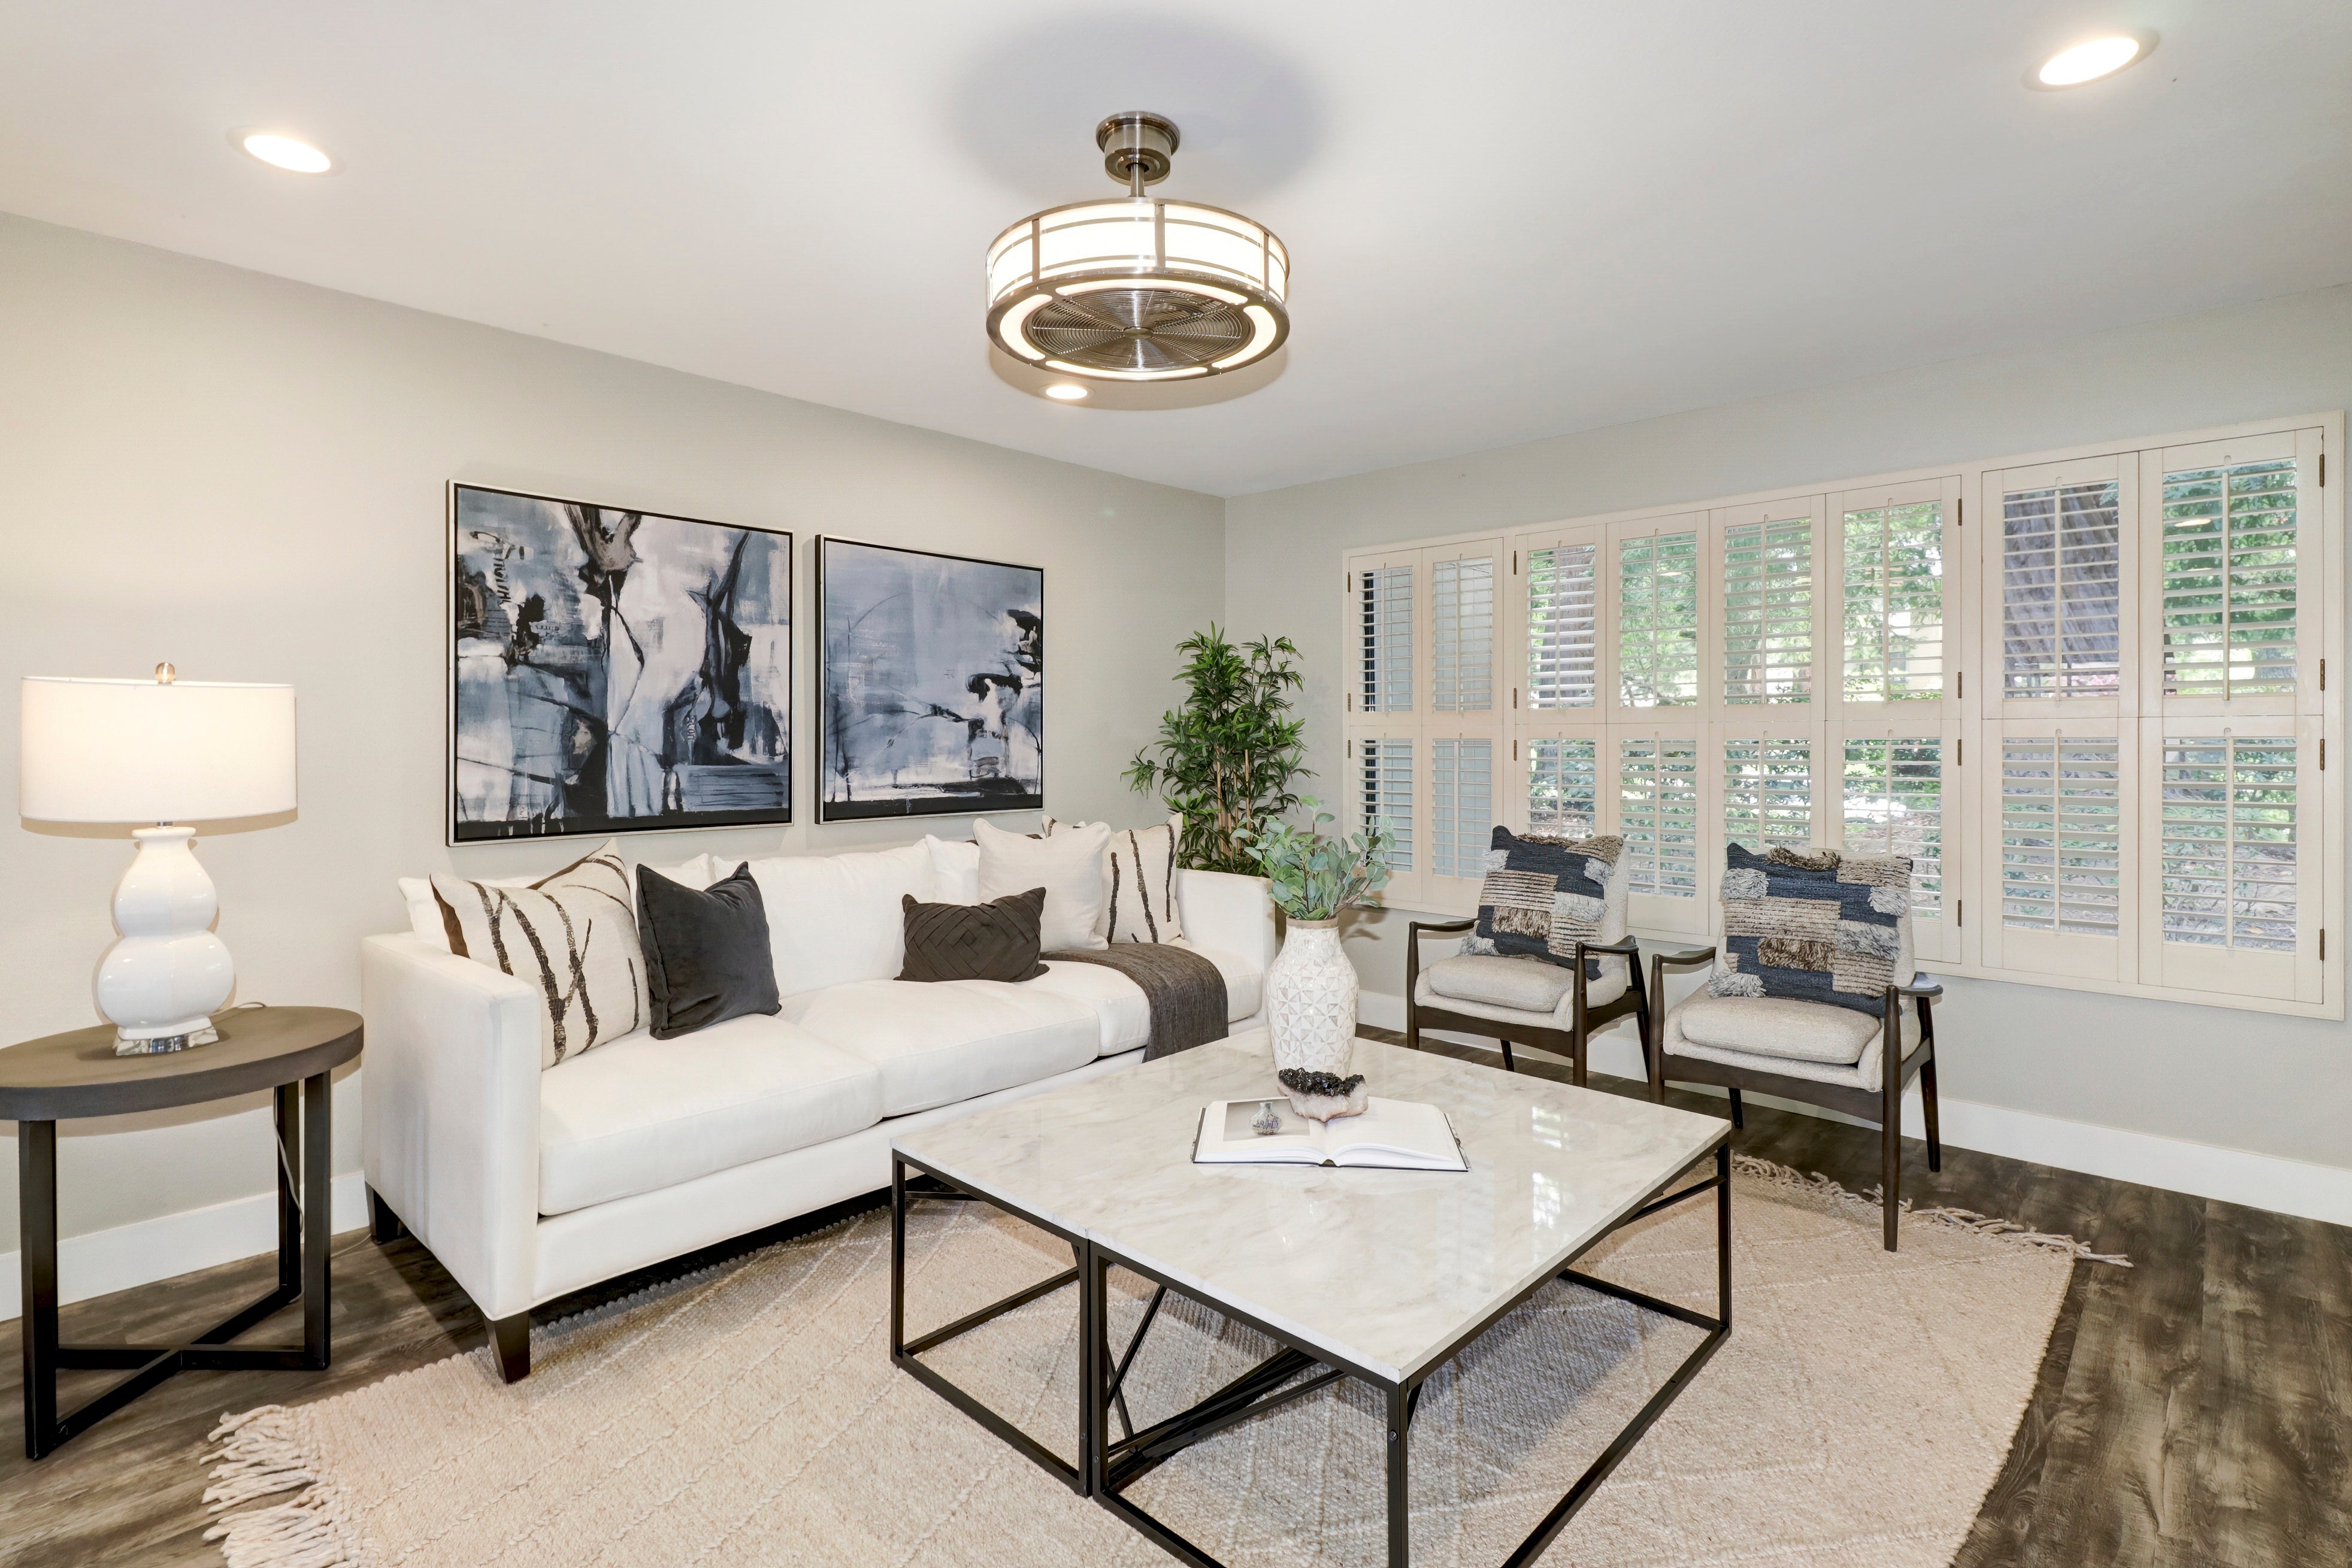 Premiere Home Staging Projects | Living room interior design idea - Swarthmore Dr, Sacramento